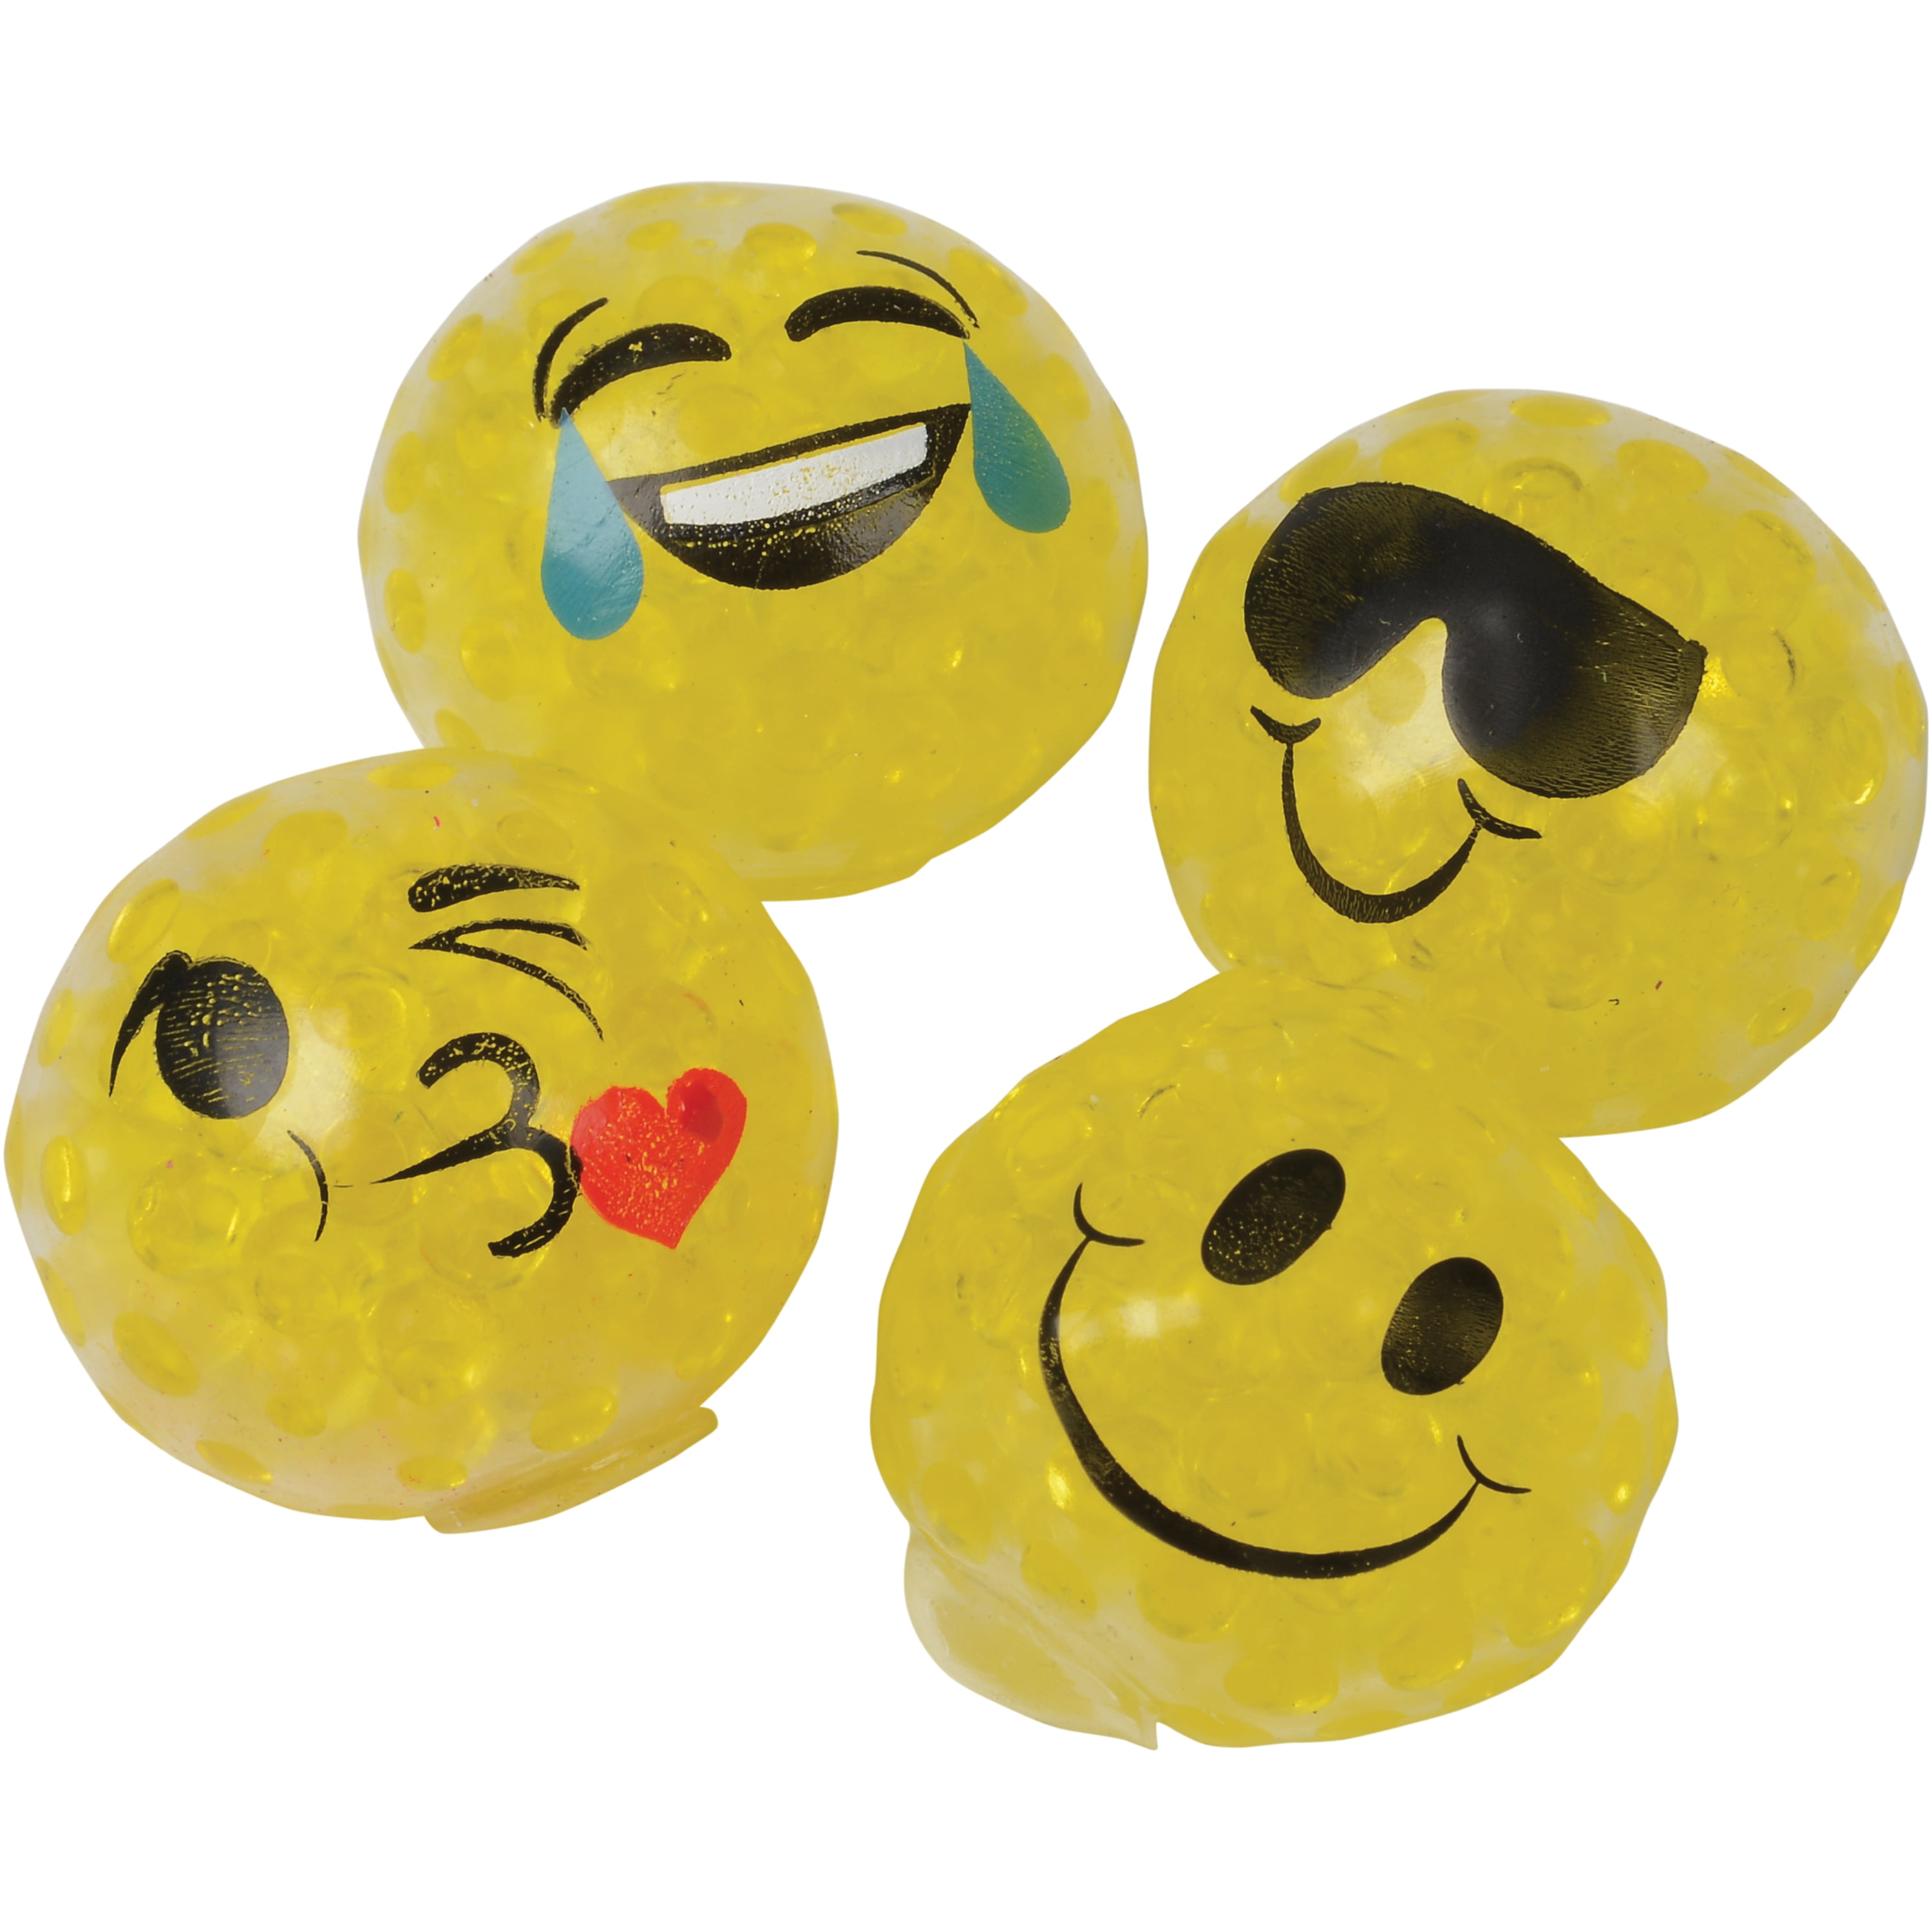 Assorted Box of Novelty Gadgets Emoji Plushies Phone Accessories Toys & More 